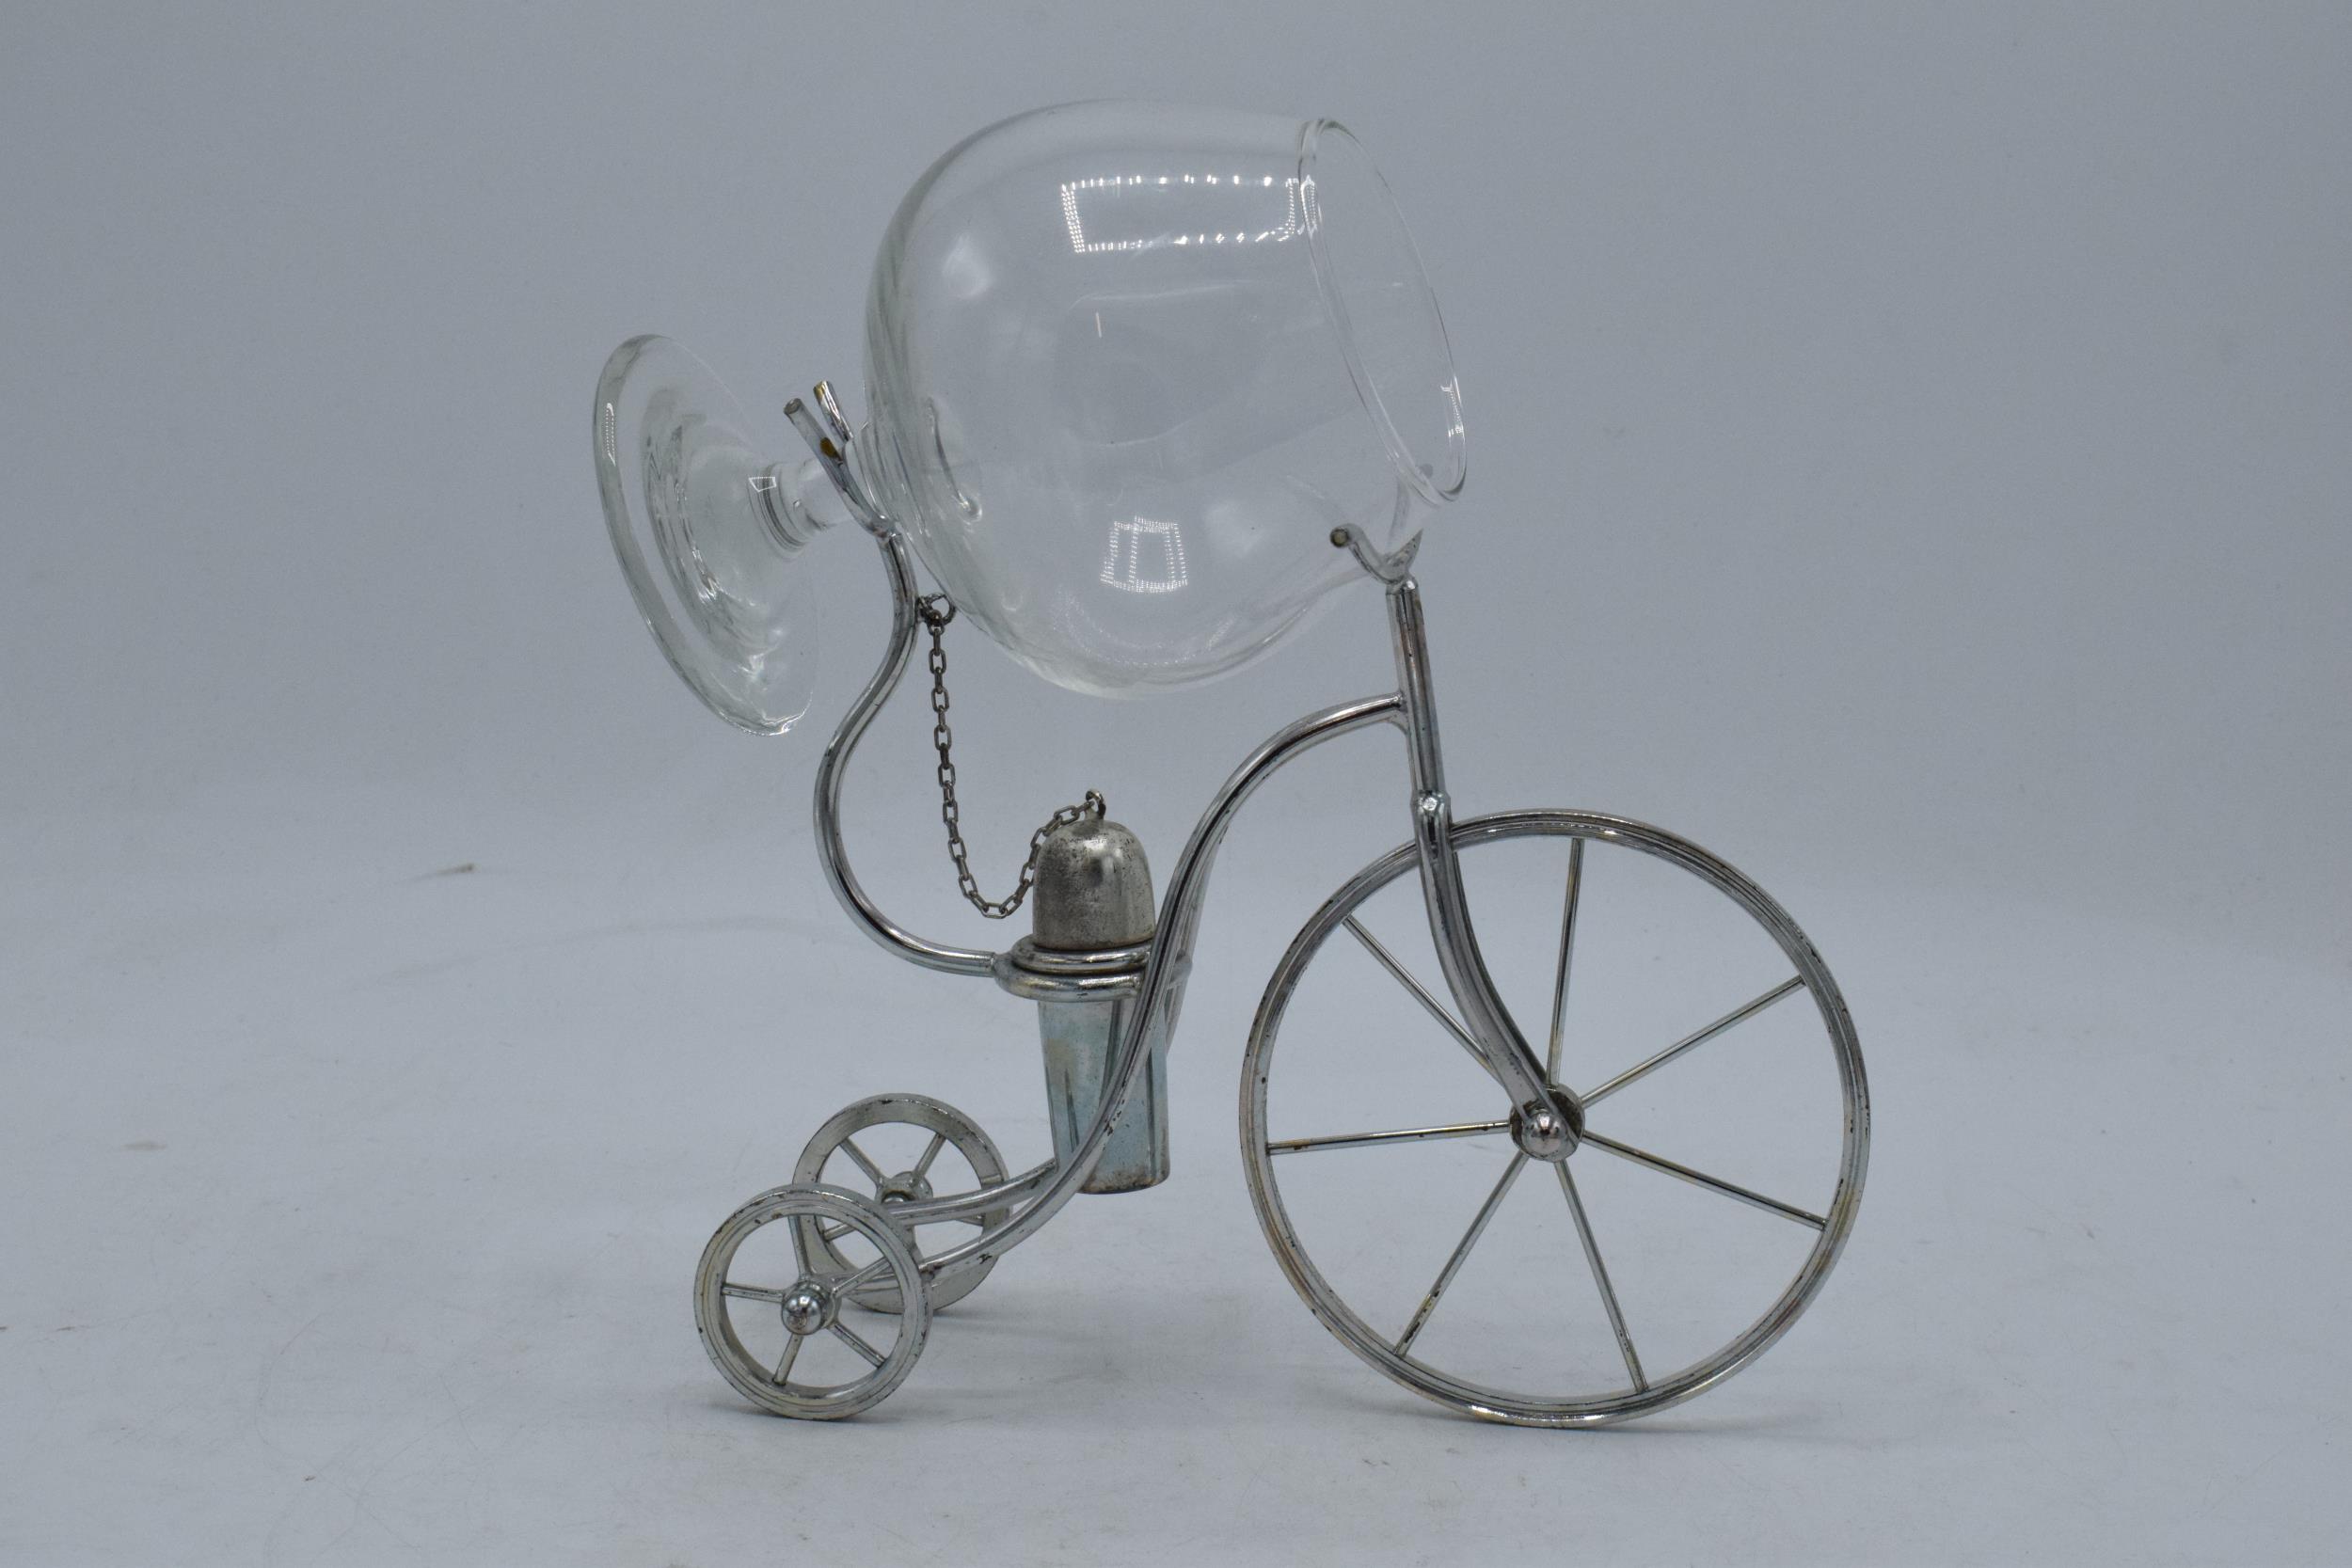 A novelty silver plated brandy warmer in the form of a tricycle / penny farthing style with a glass.